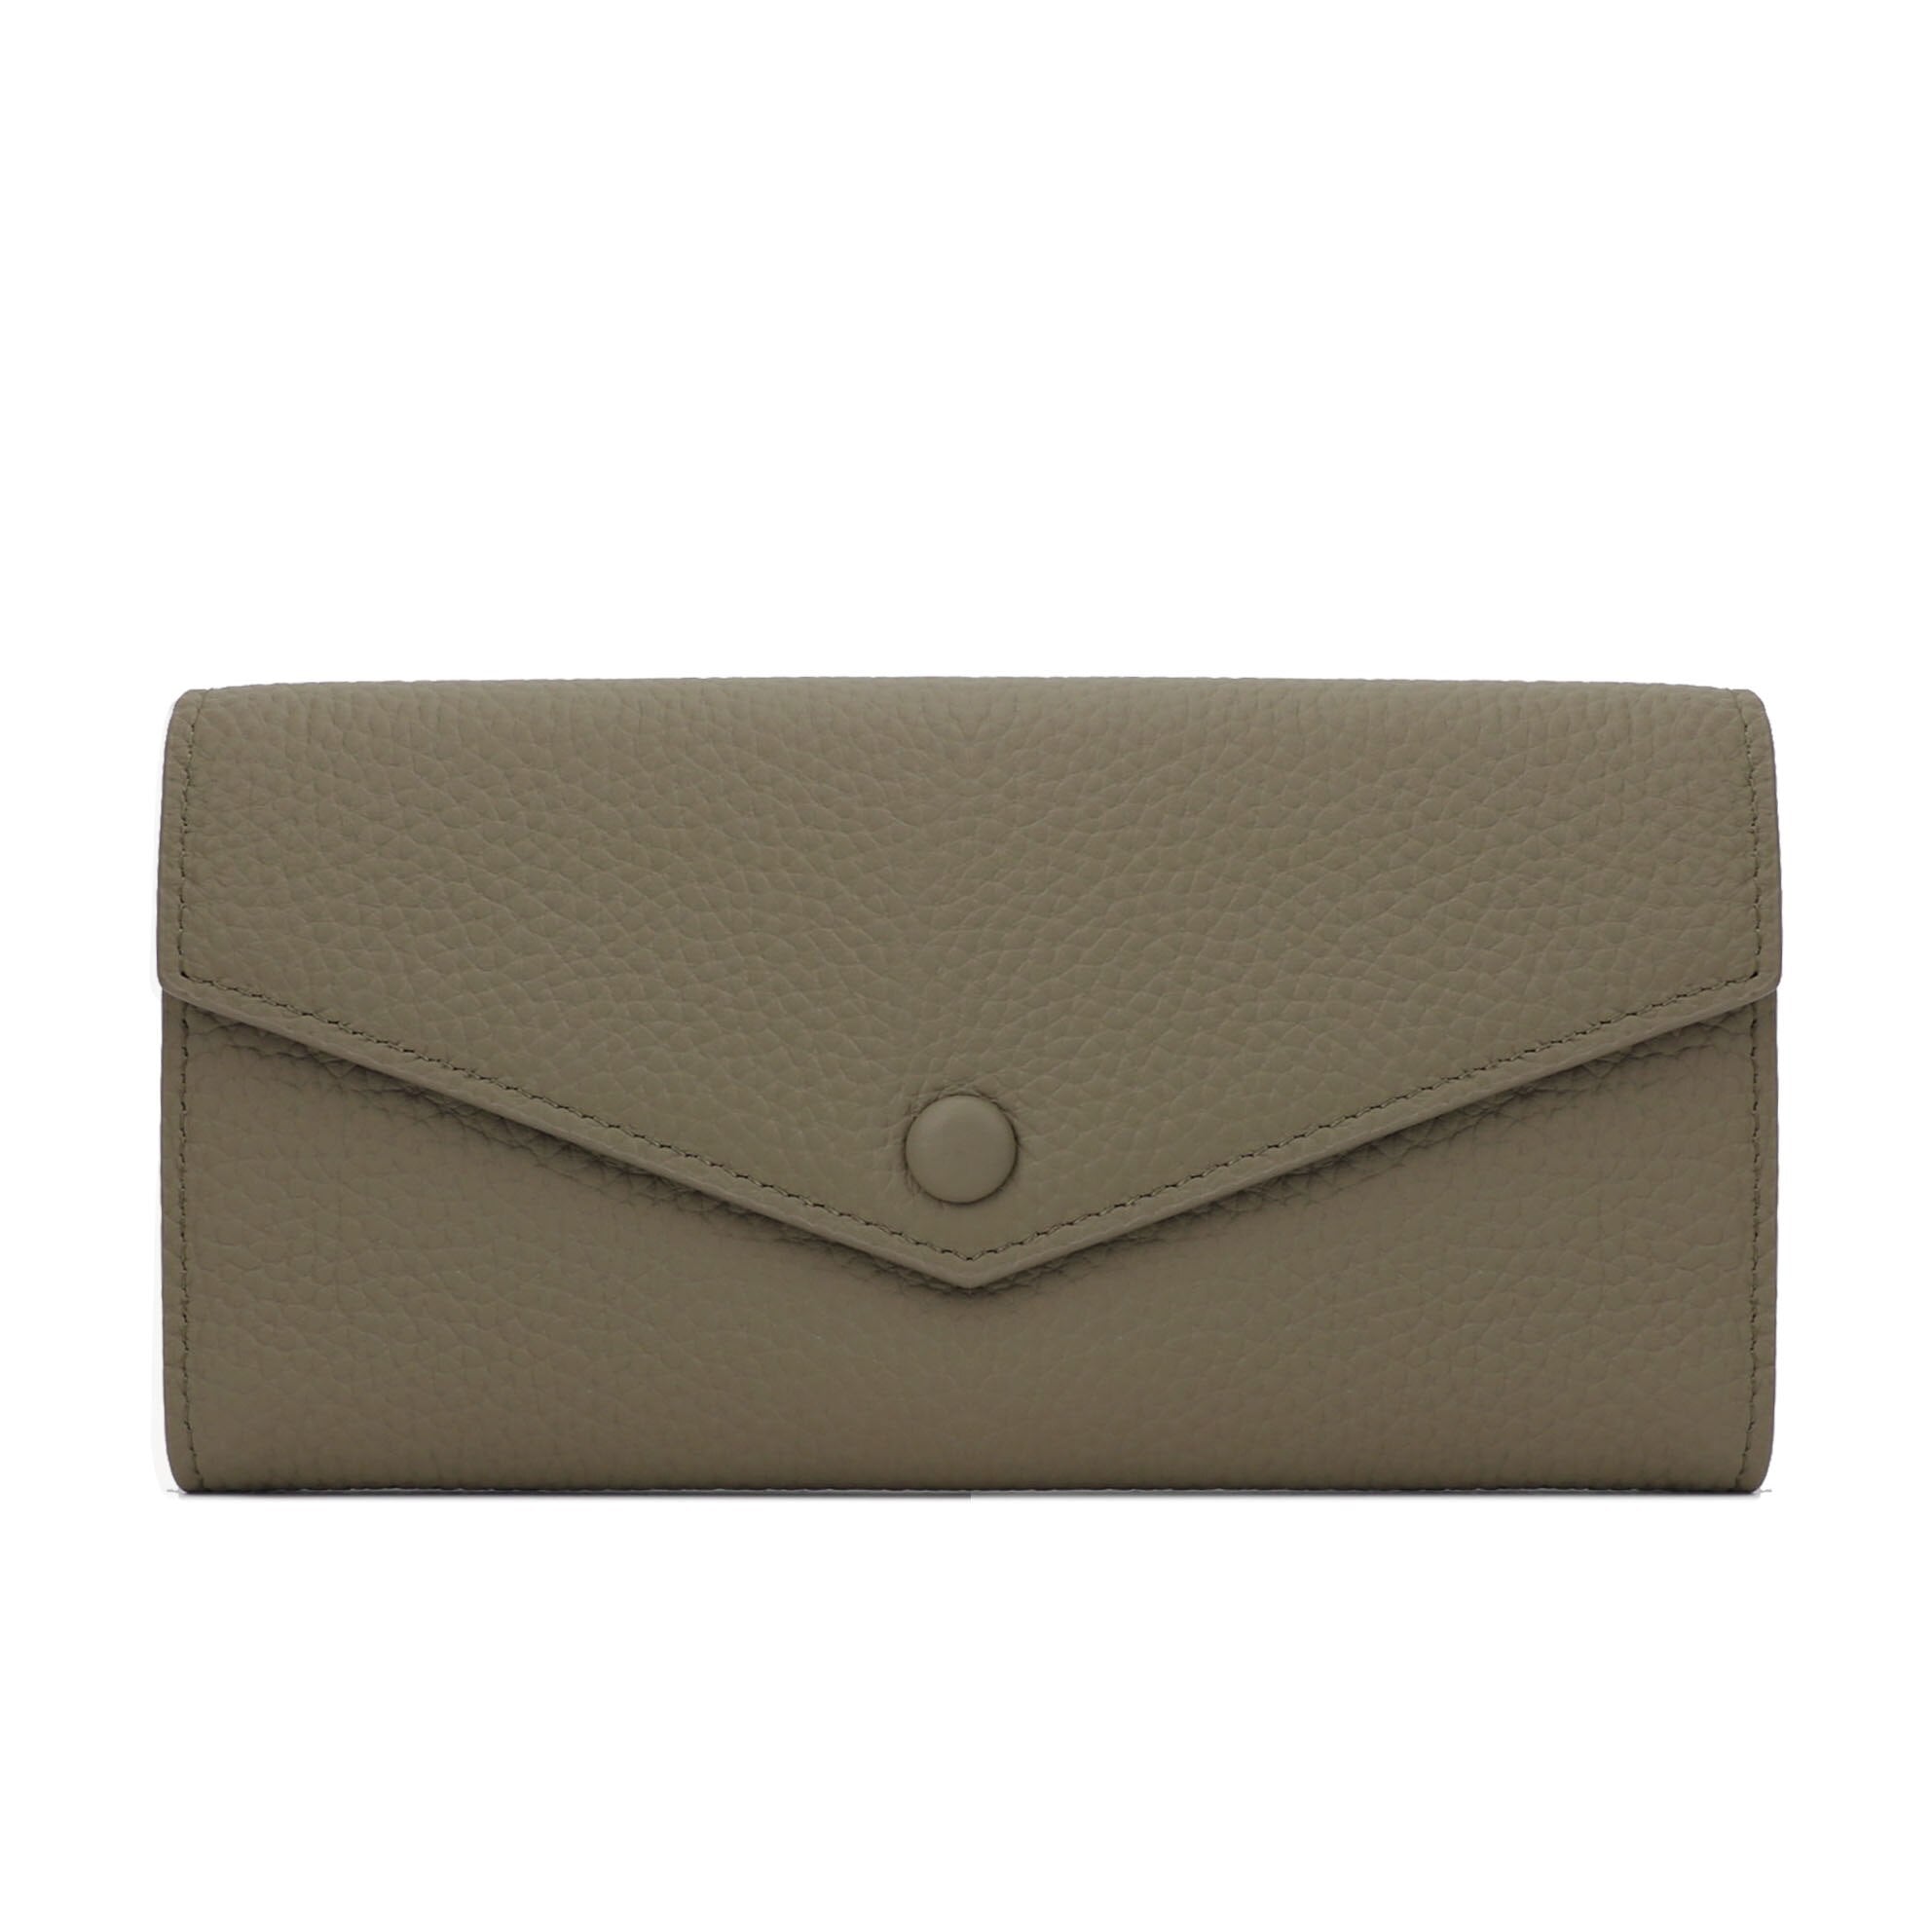 Womens Genuine Leather Long Fennec Wallet Clutch Handbag With Gold Hardware  And Flat Pockets Fashionable Letter Hand Bag With Card Slots And Crossbody  Strap Model Bo280B From Yq5664, $66.97 | DHgate.Com